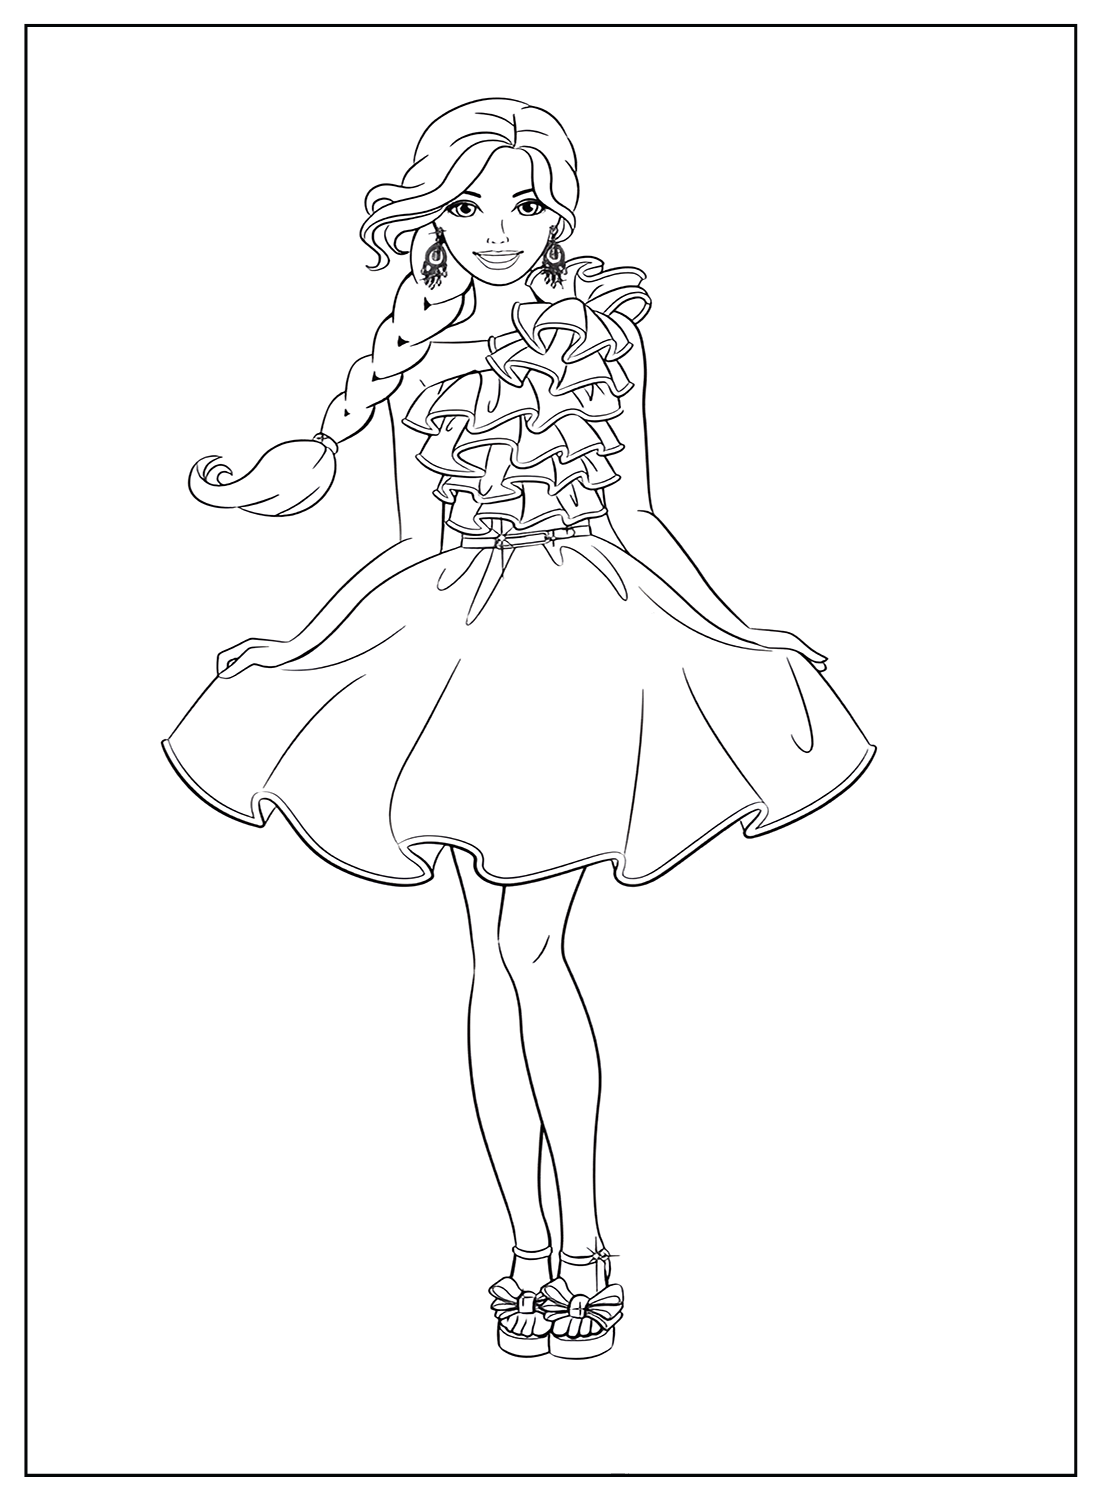 Printable Barbie Coloring Page from Barbie